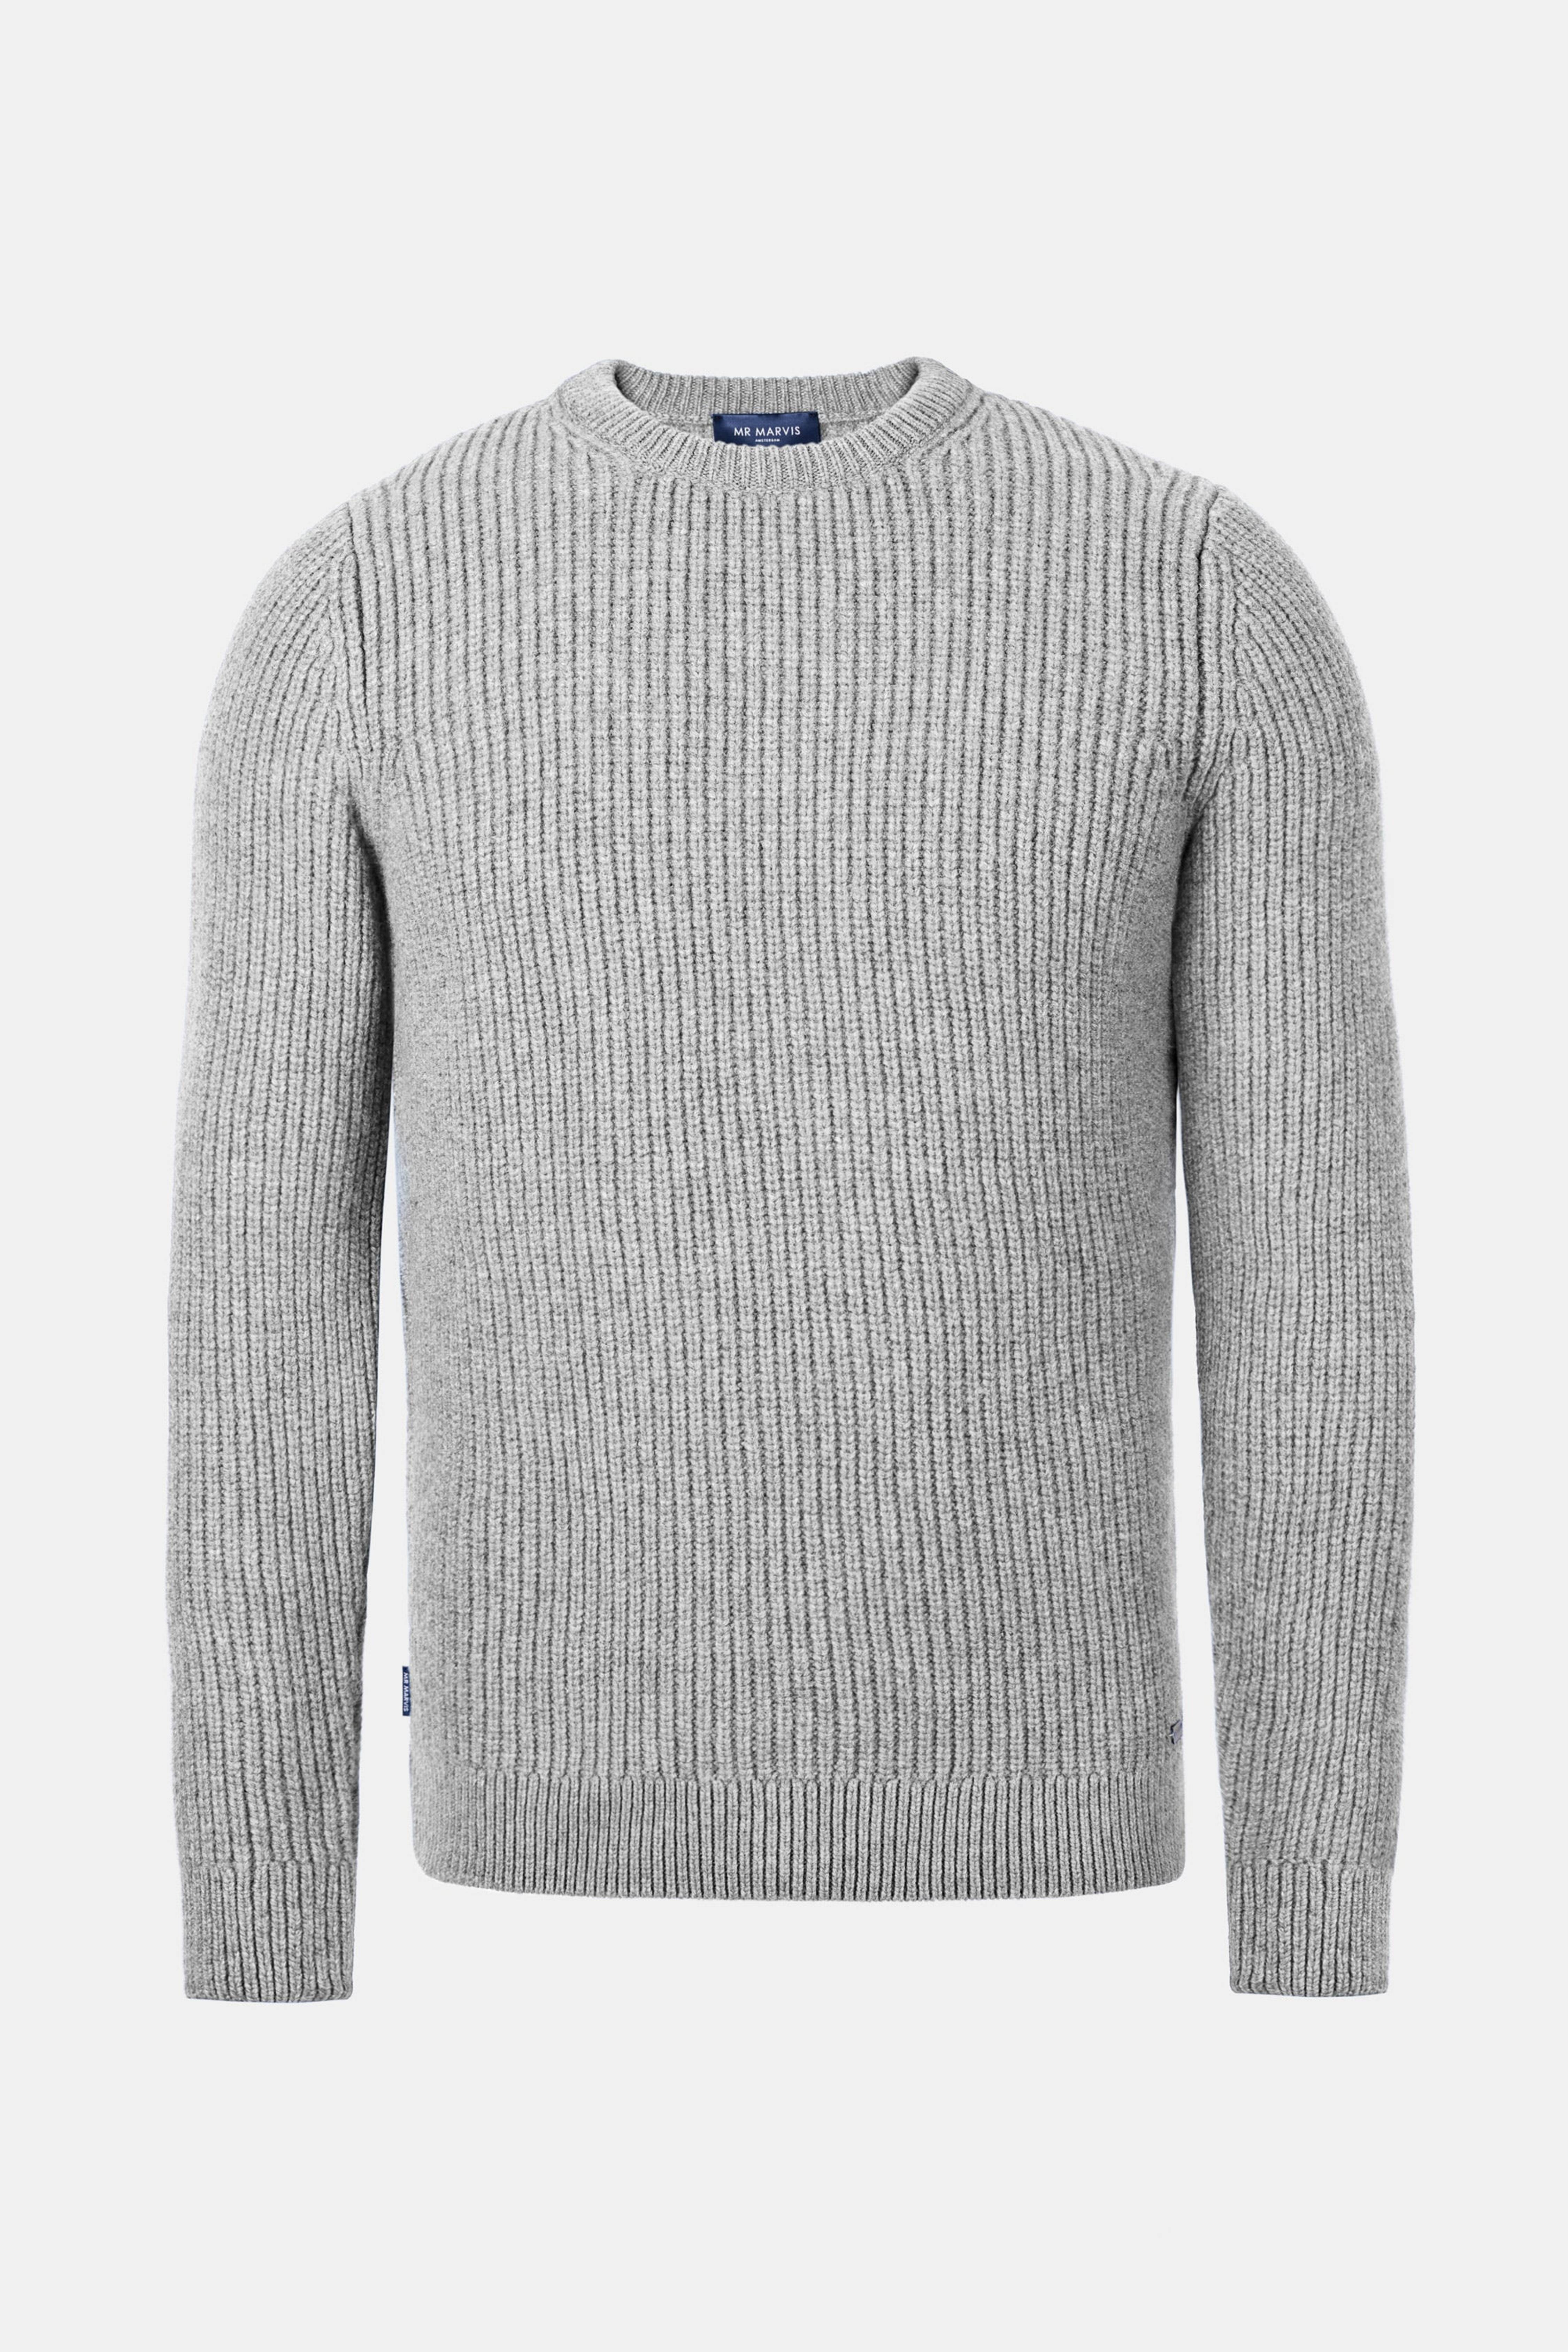 Oysters * Die Knit Pullovers